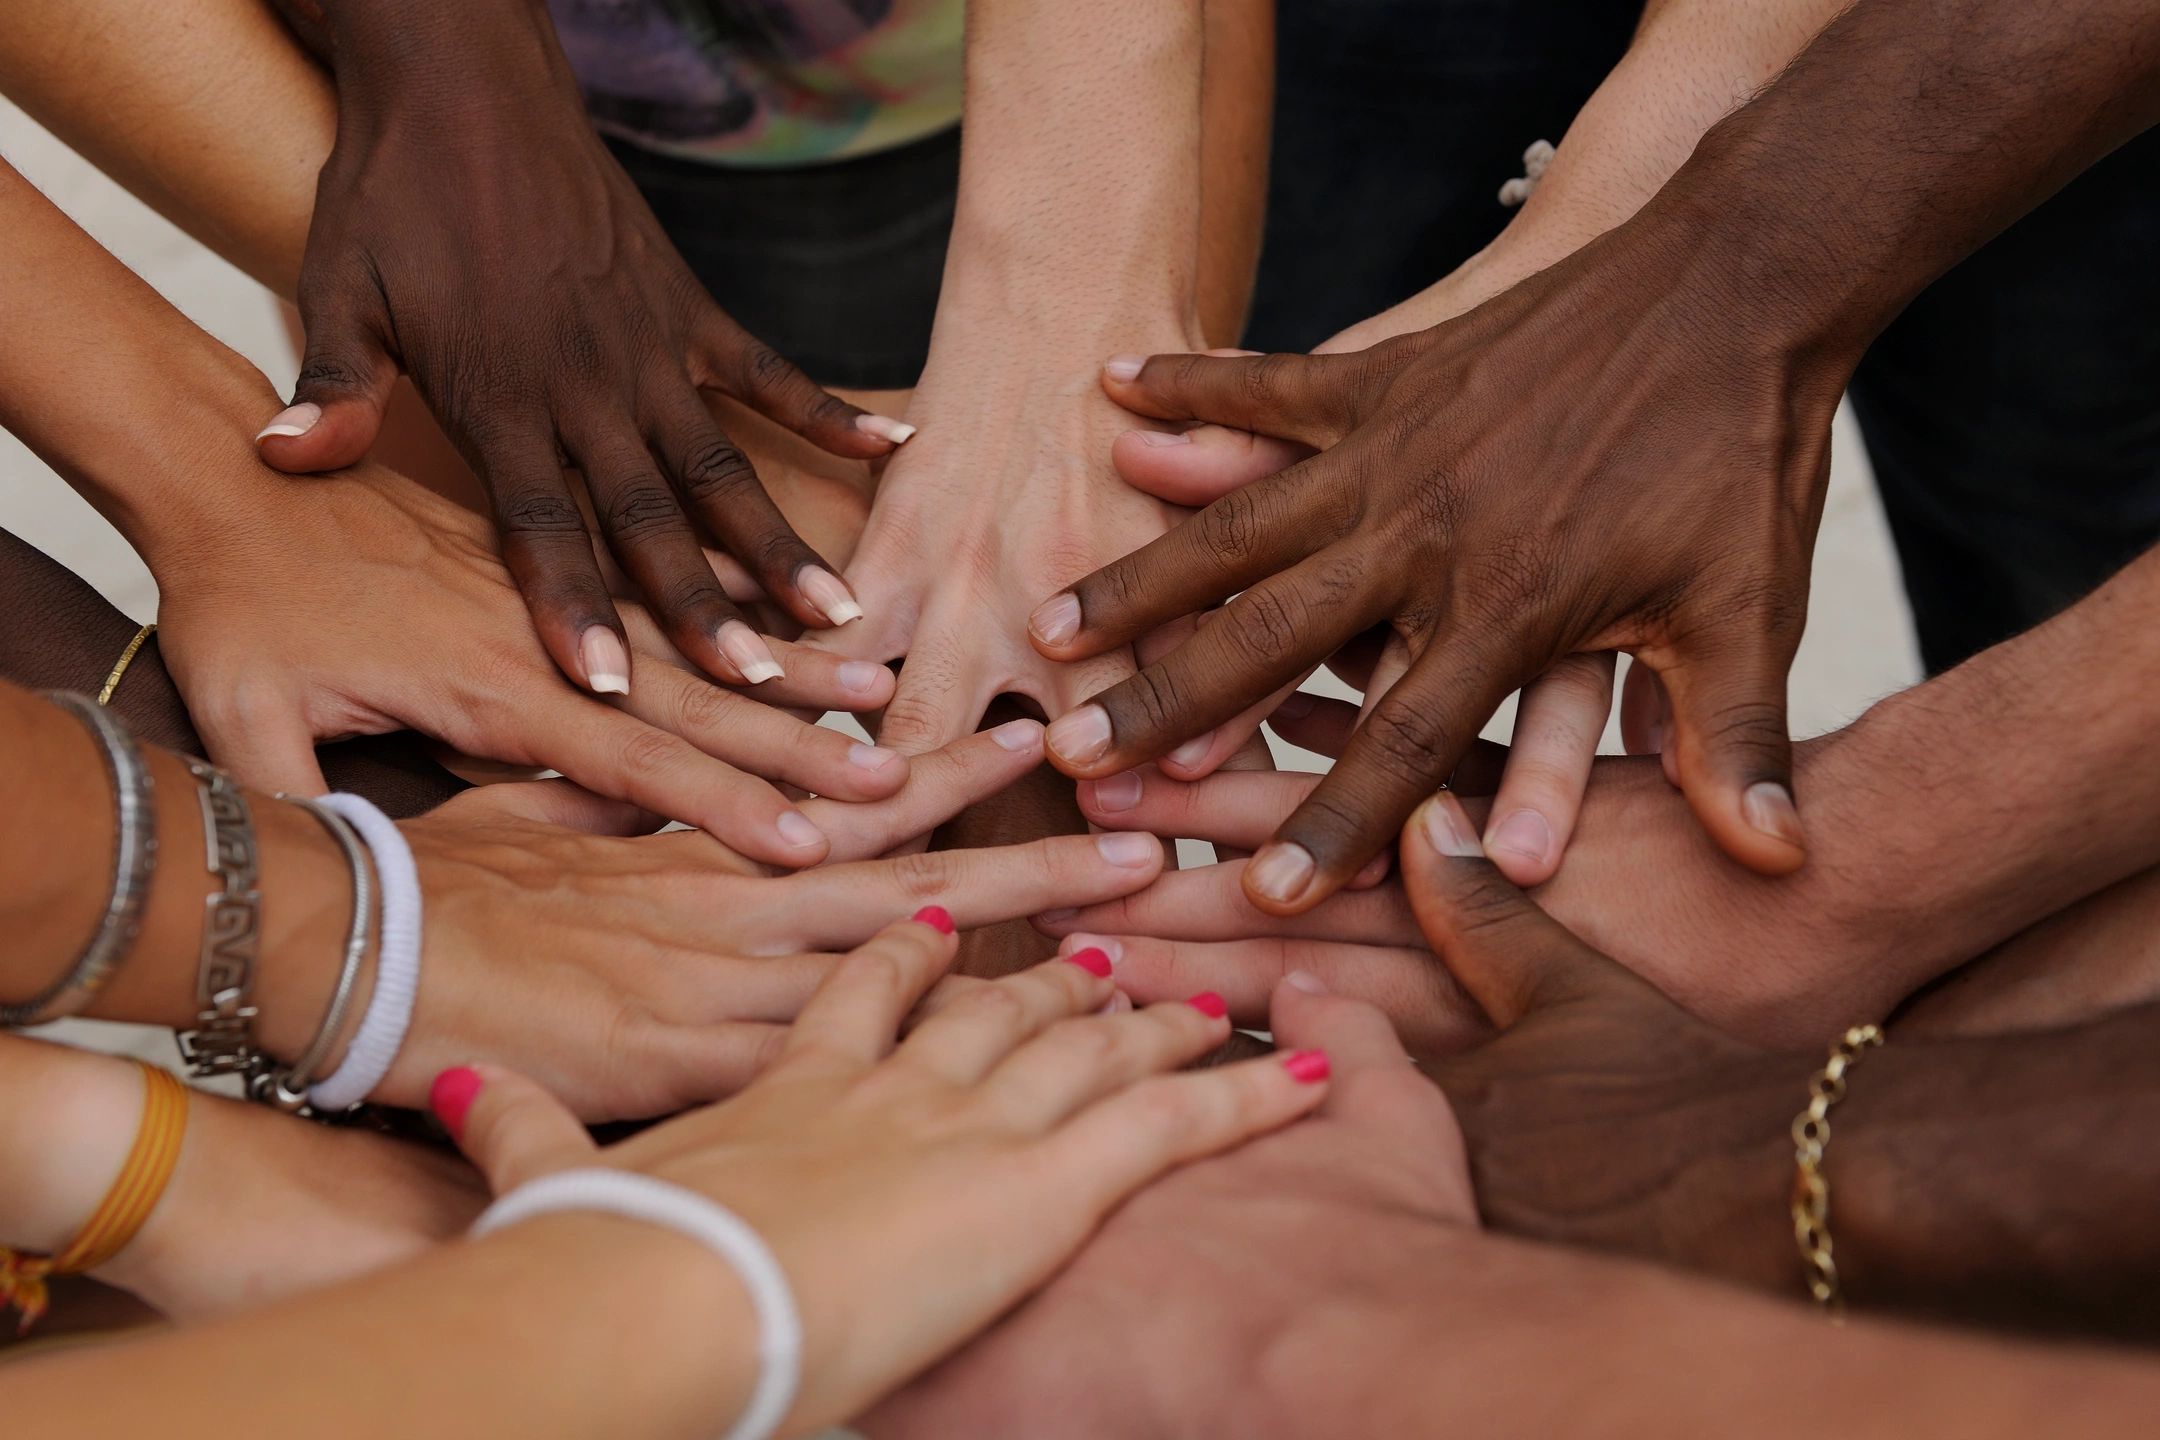 A group of hands reaching in together, wearing charity wrsitbands.